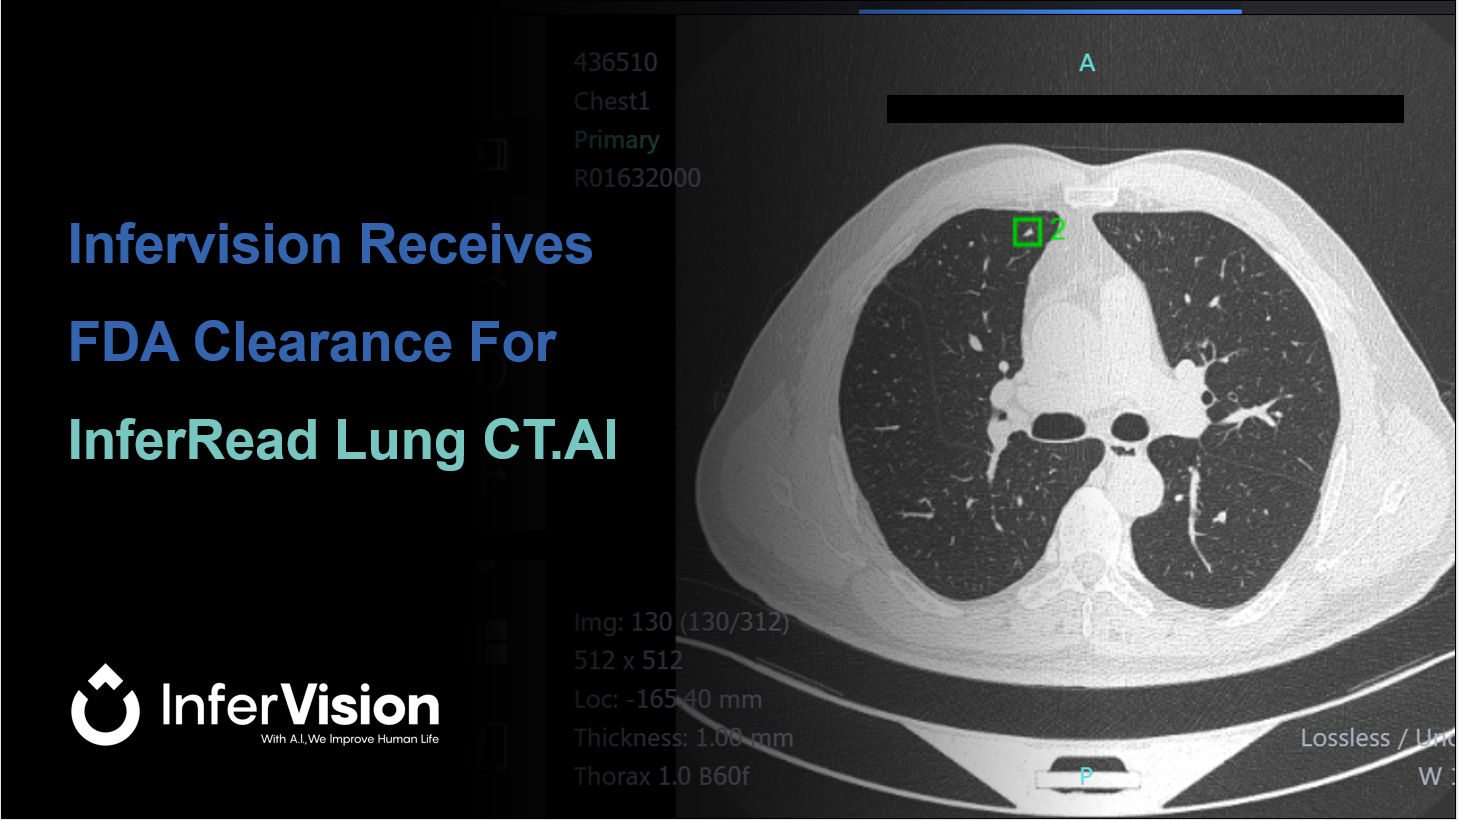 Infervision Receives FDA Clearance for the InferRead Lung CT.AI